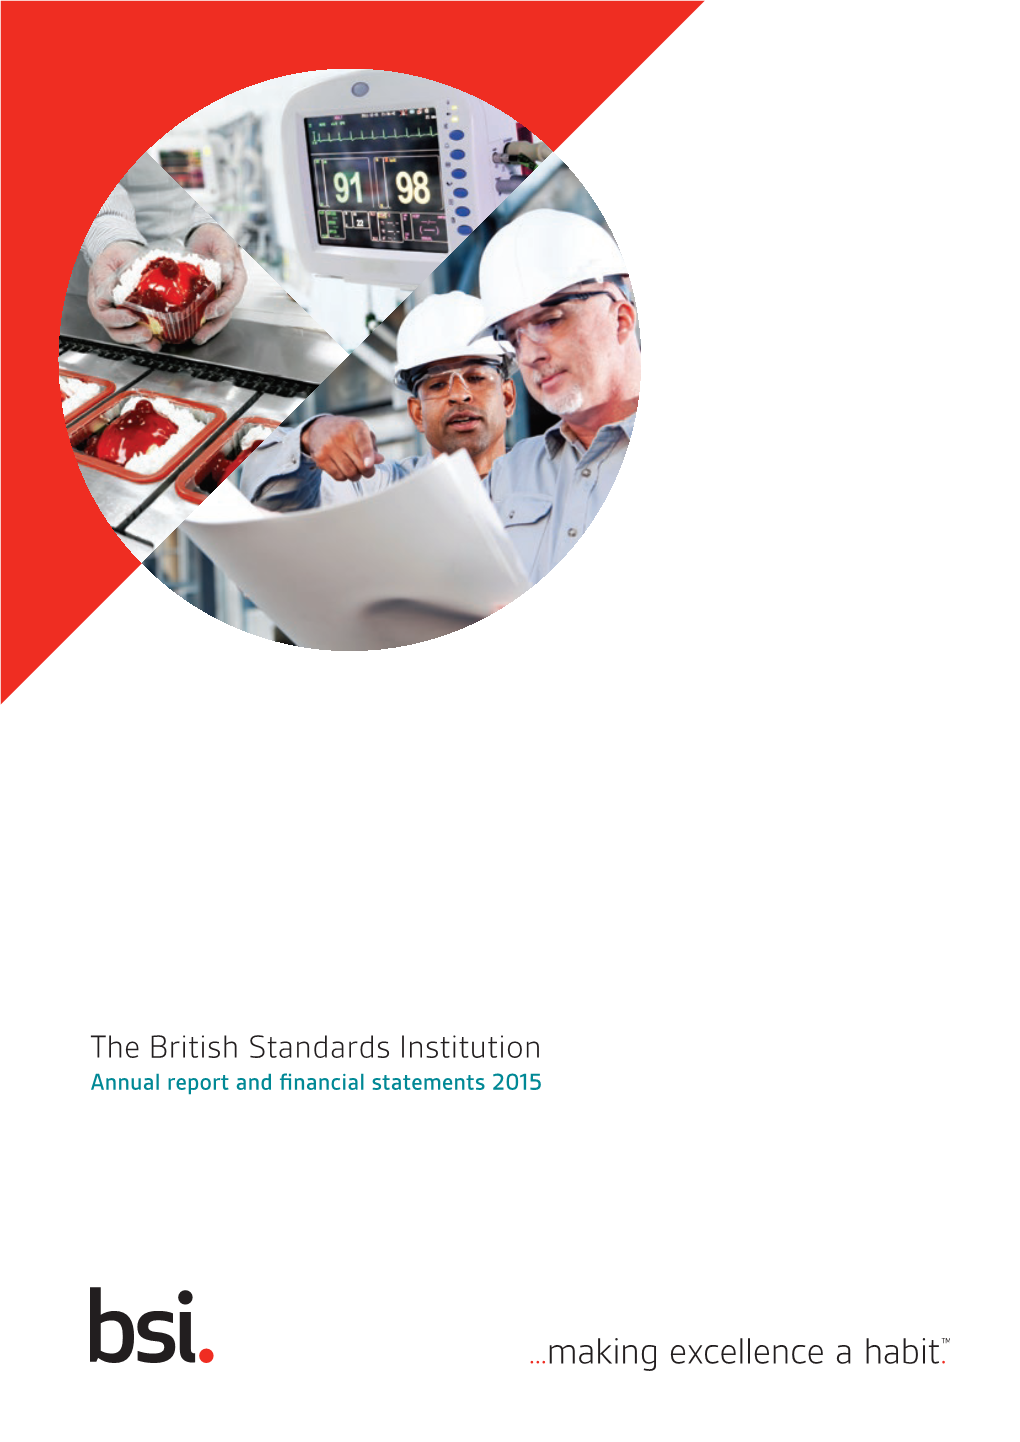 The British Standards Institution Annual Report and Financial Statements 2015